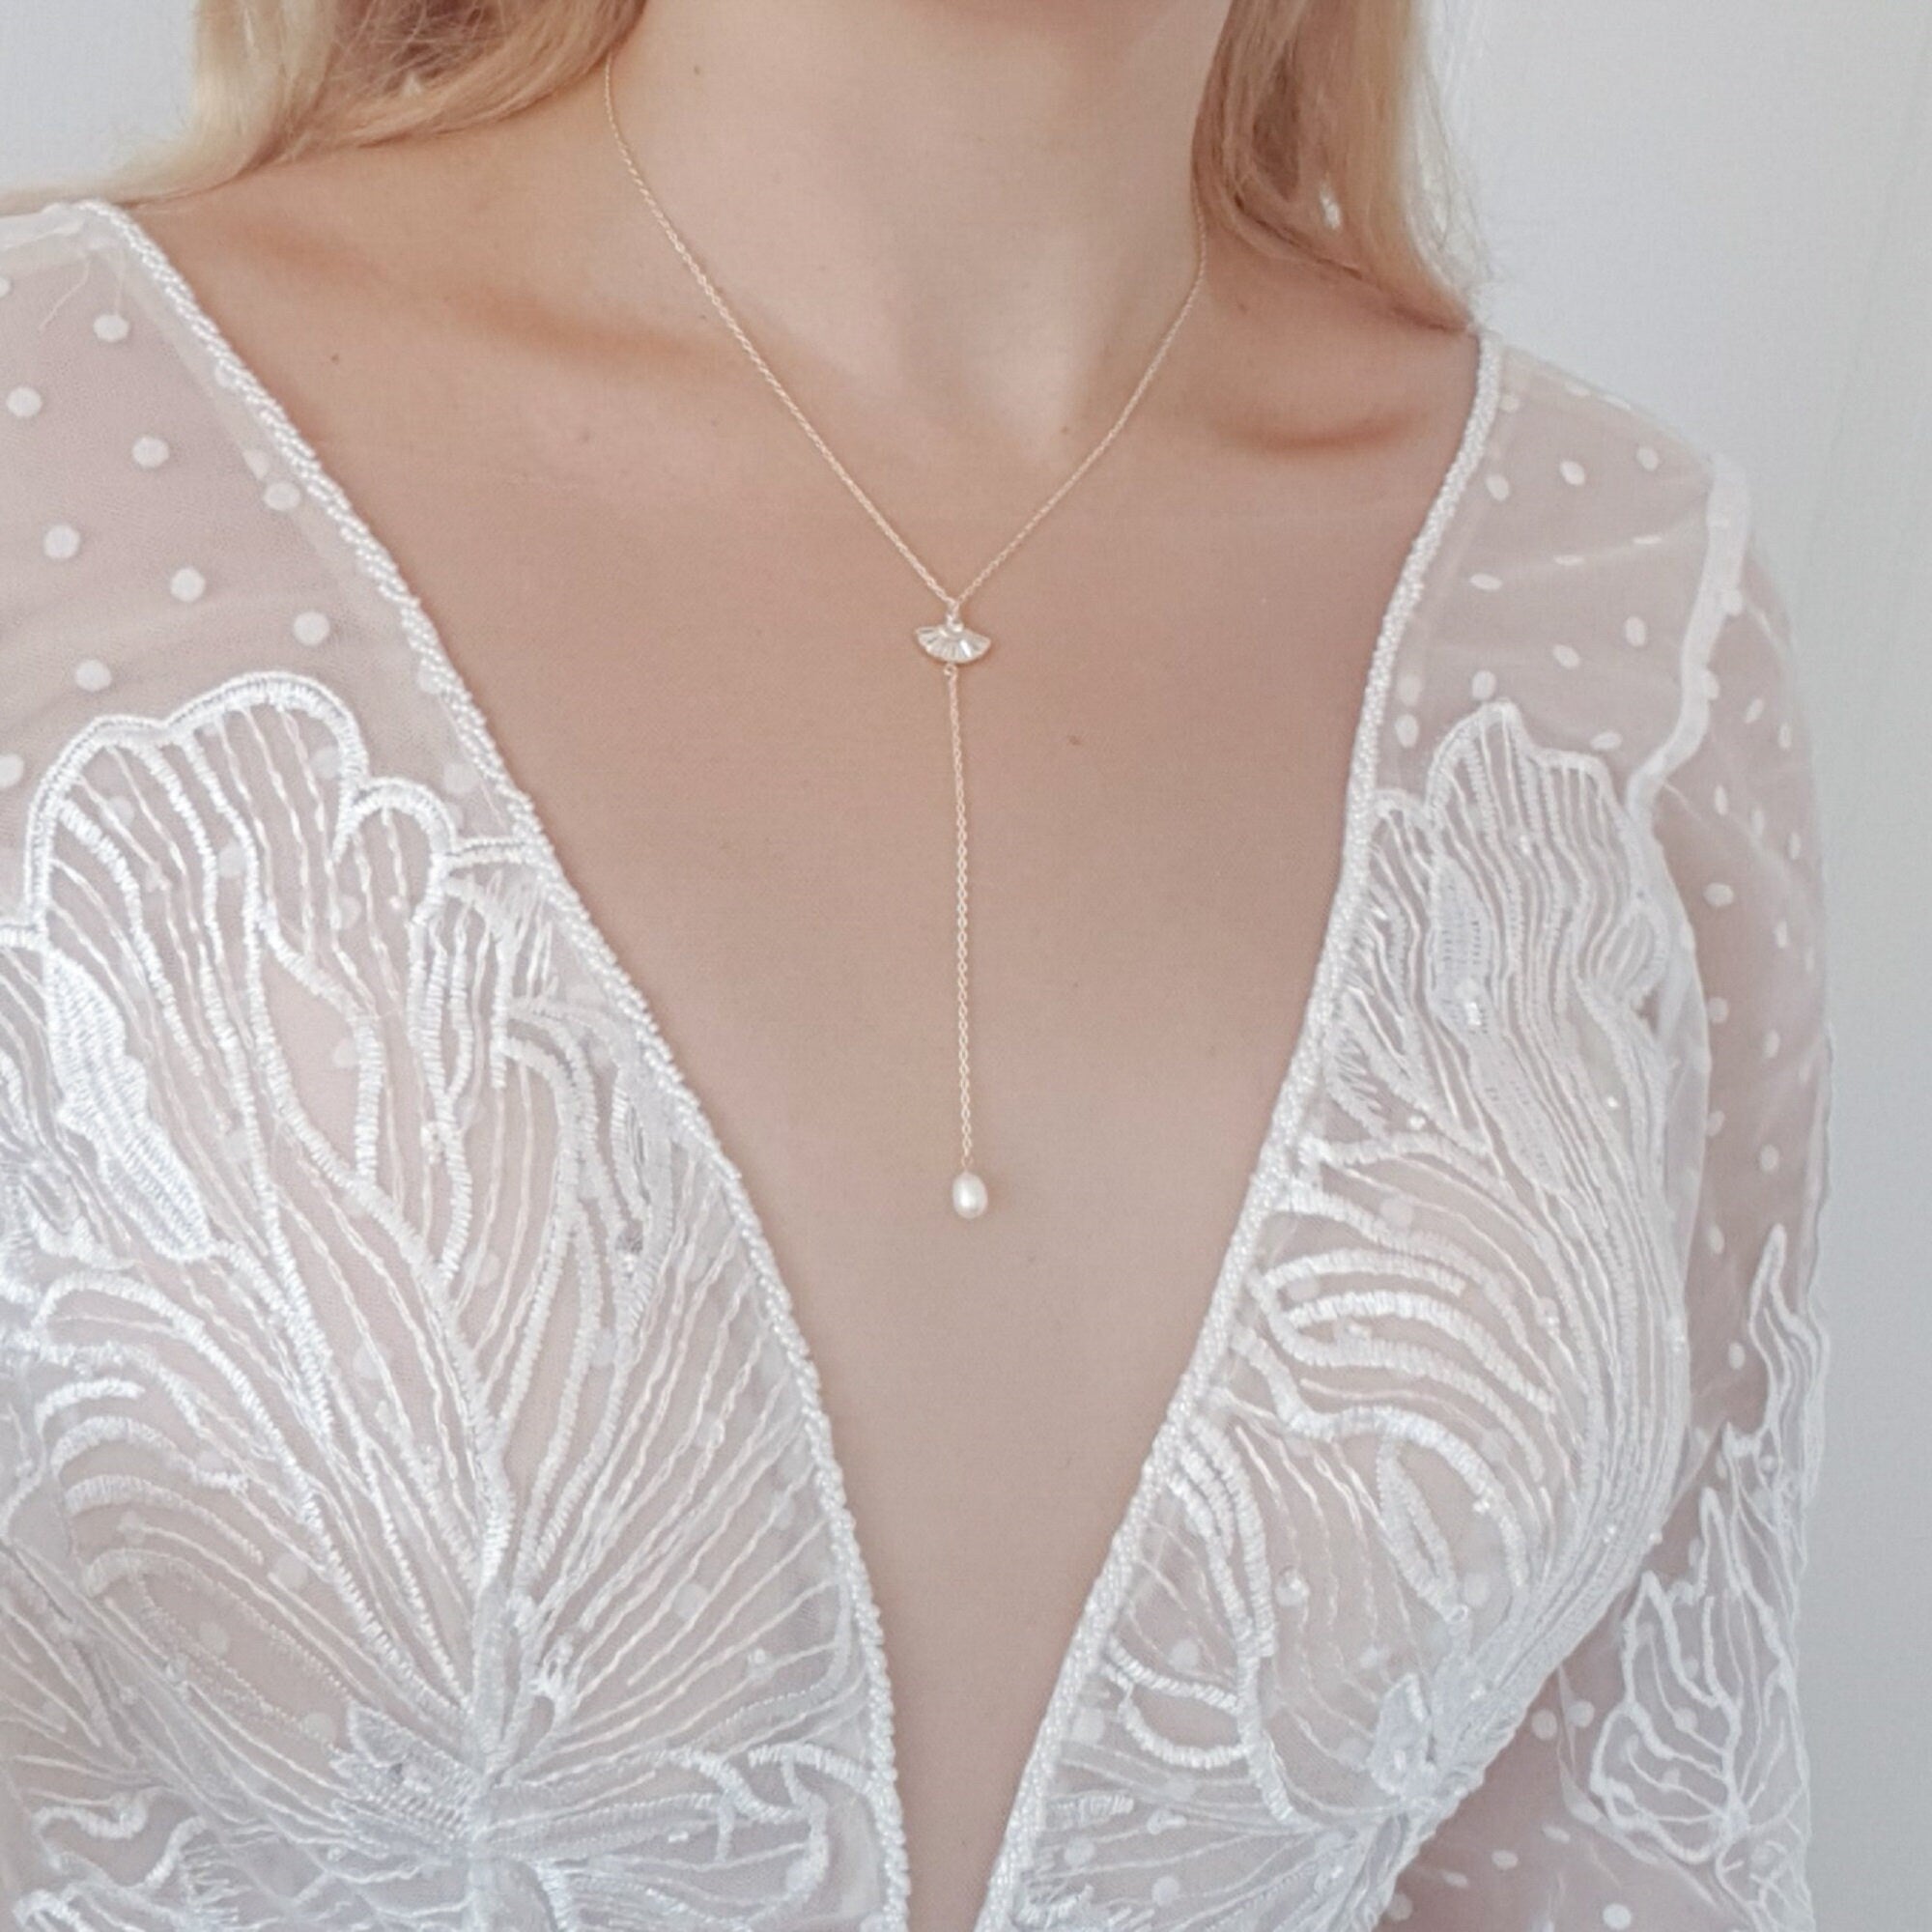 Bridal Necklace, Lariat Necklace, Art Deco Necklace, Crystal Pearl Necklace, Gold Wedding Necklace, Bridesmaid Gift, Bridal Jewelry